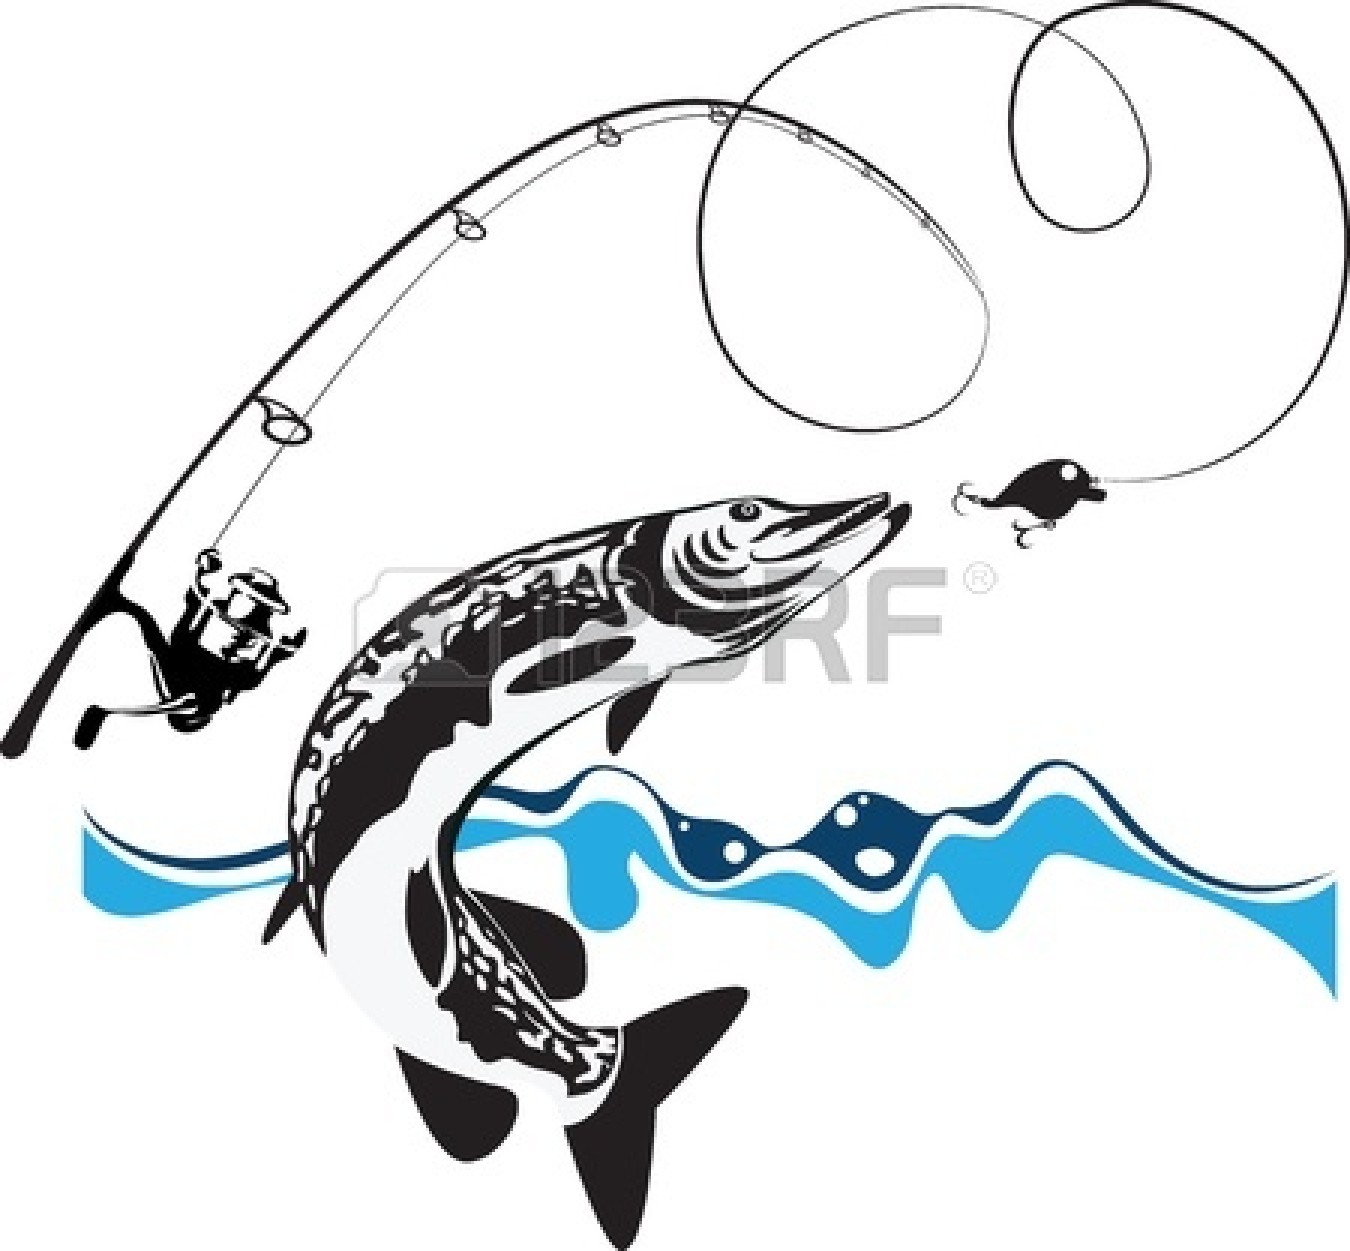 Fishing Pole Vector   Clipart Panda   Free Clipart Images